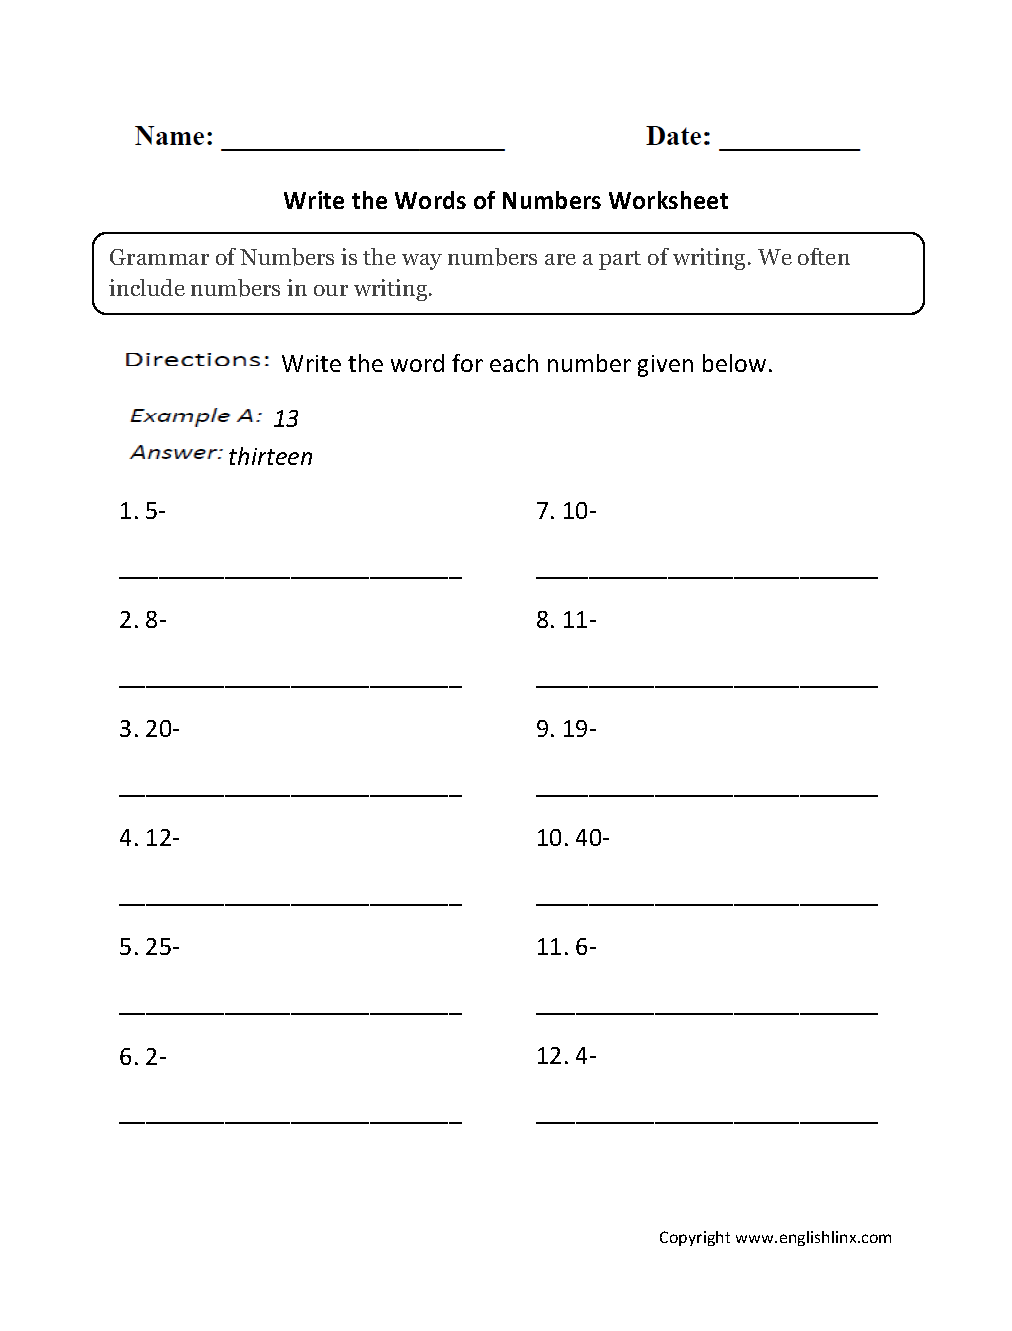 write-numbers-in-words-math-worksheets-mathsdiary